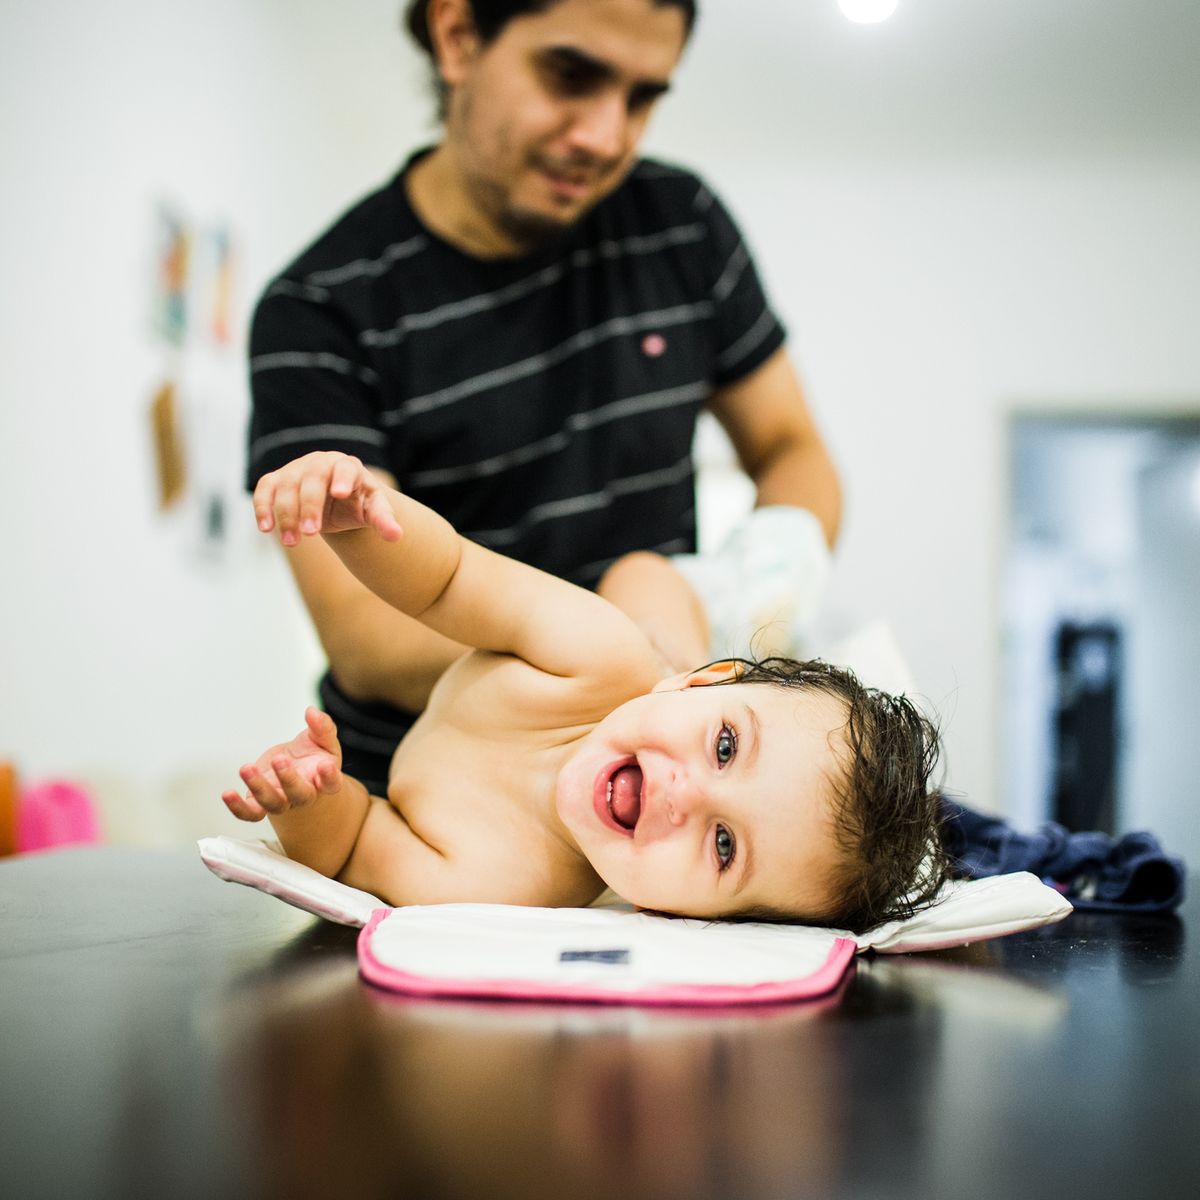 Midsection Of Father With Smiling Baby On Table